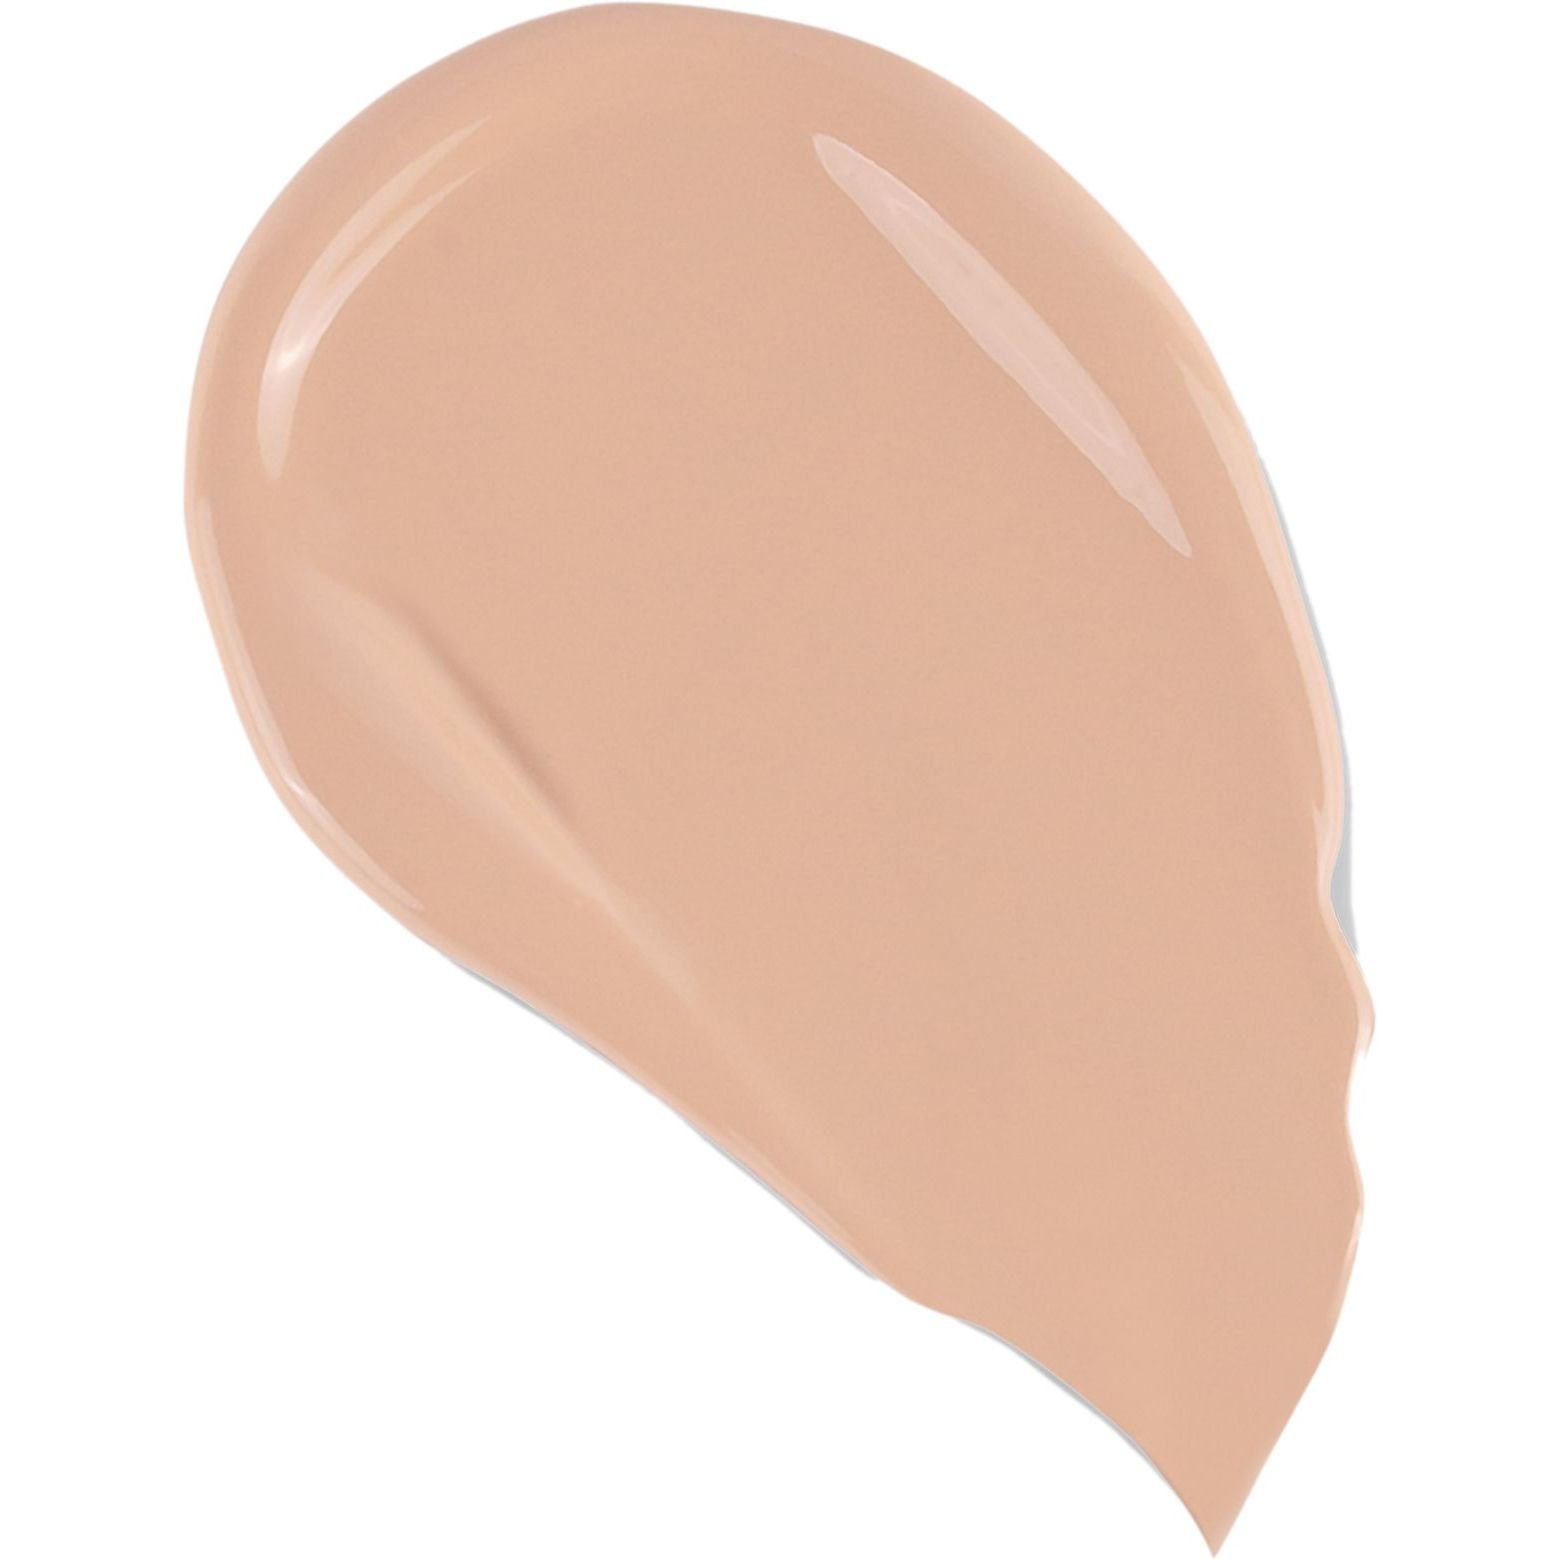 Тональная основа Note Cosmetique Invisible Perfection Foundation тон 120 (Natural Ivory) 35 мл - фото 3